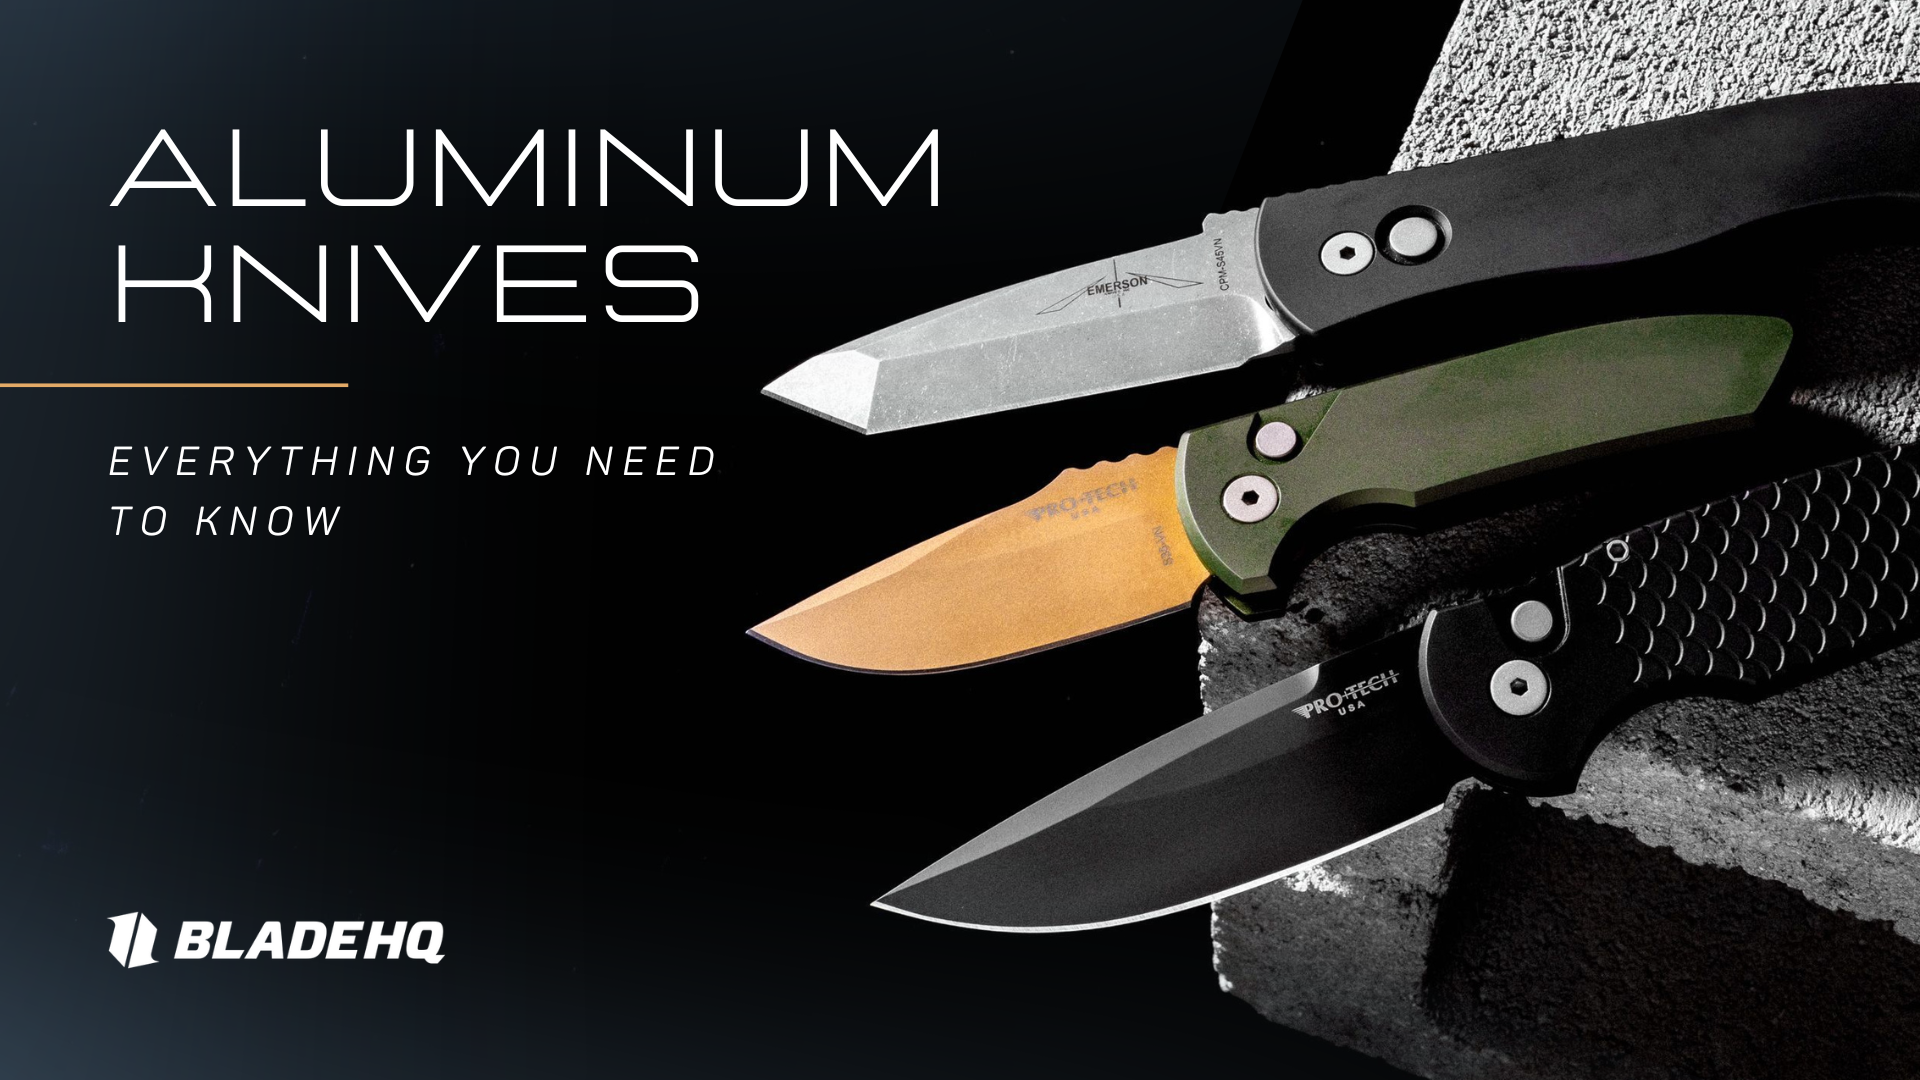 For a Durable Handle, Look No Further Than Aluminum!